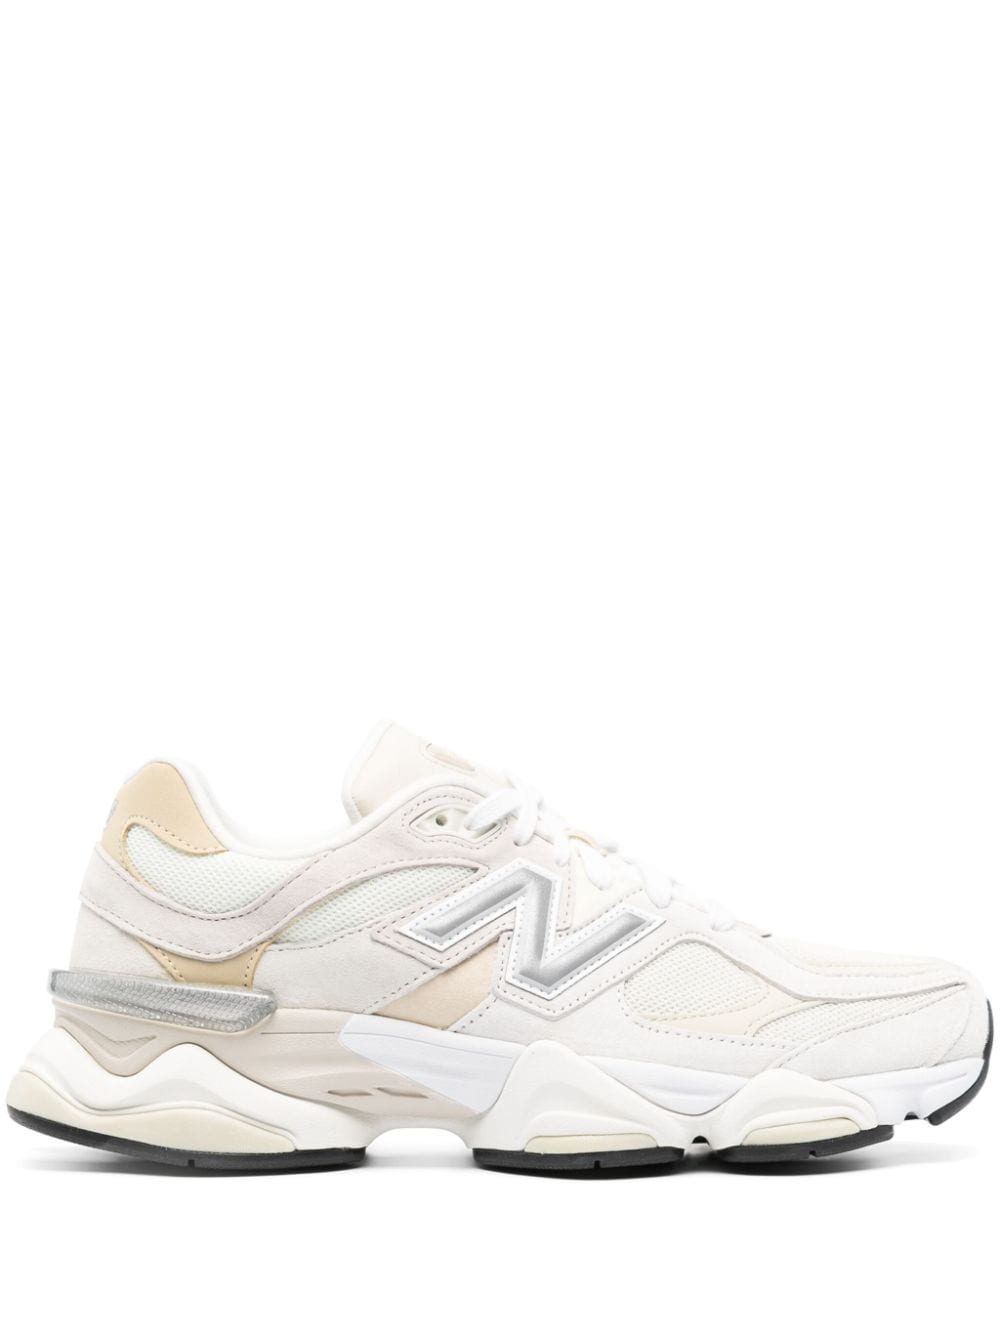 New Balance 9060 low-top sneakers - White